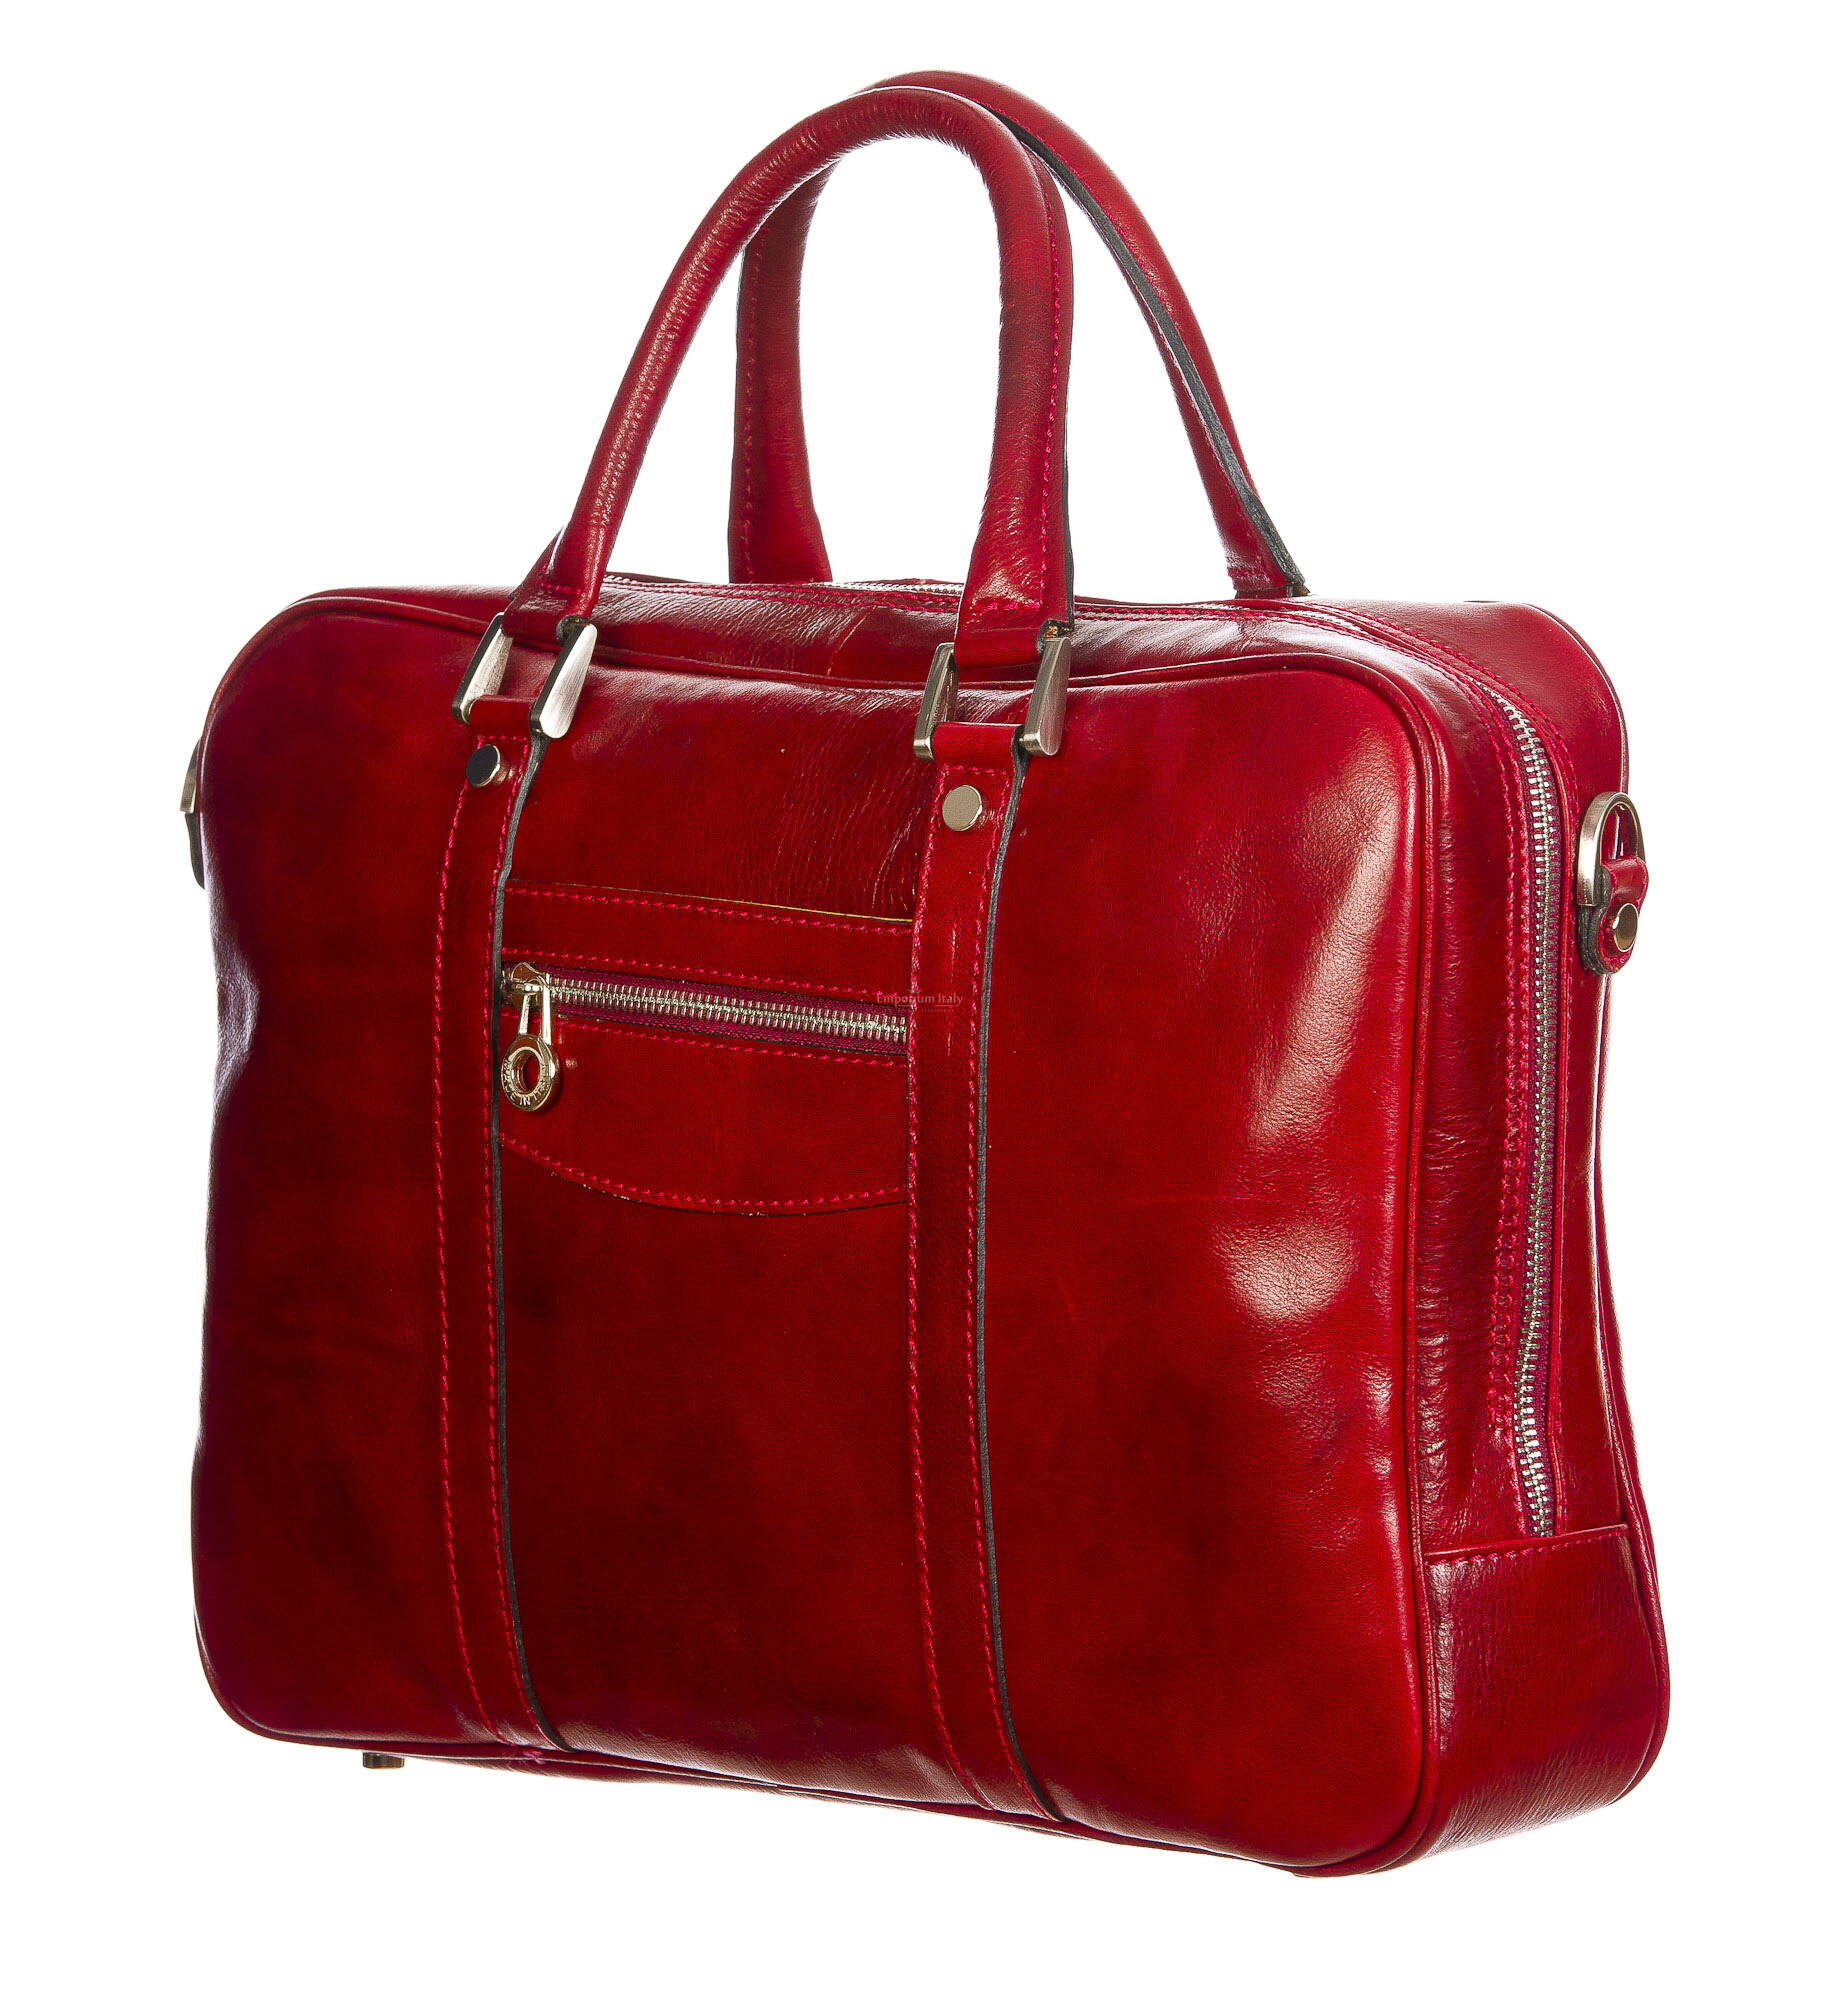 MURES : briefcase / office bag, man / woman, in bufferd leather, color:  RED, Made in Italy., OFFICE BAGS